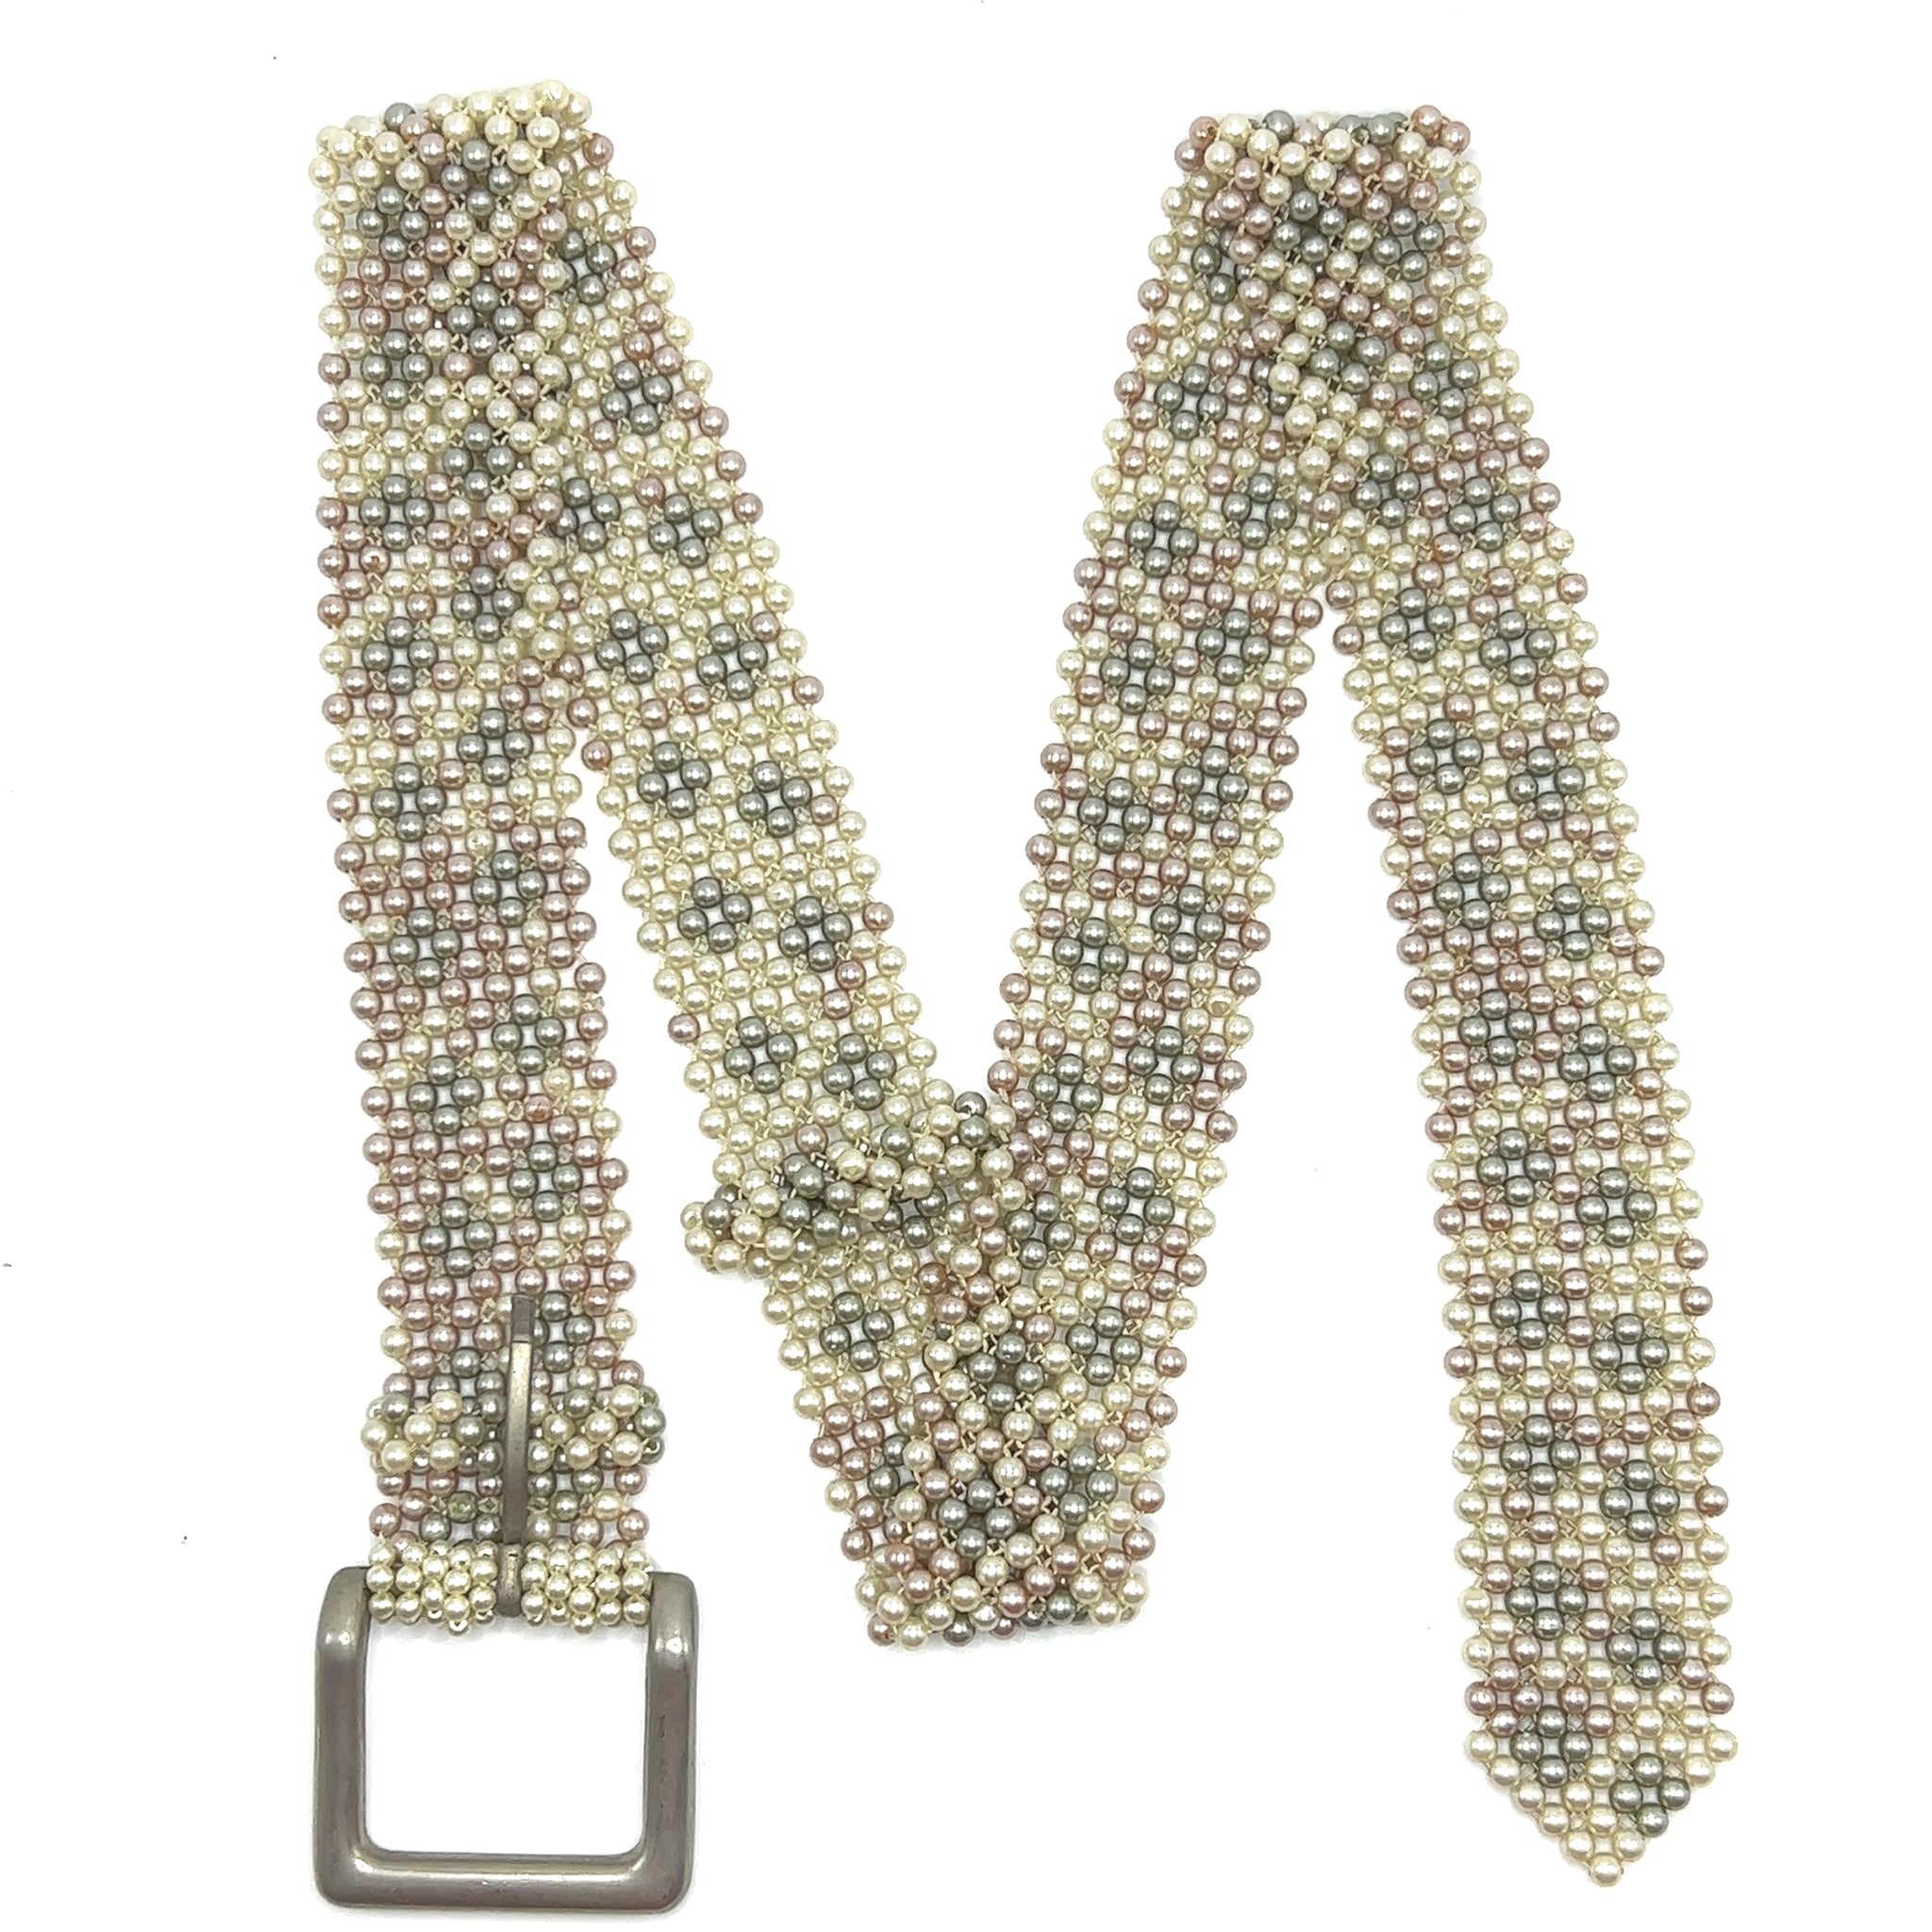 Multi-Colored Pearl Buckled Belt Summer Unisex Collection